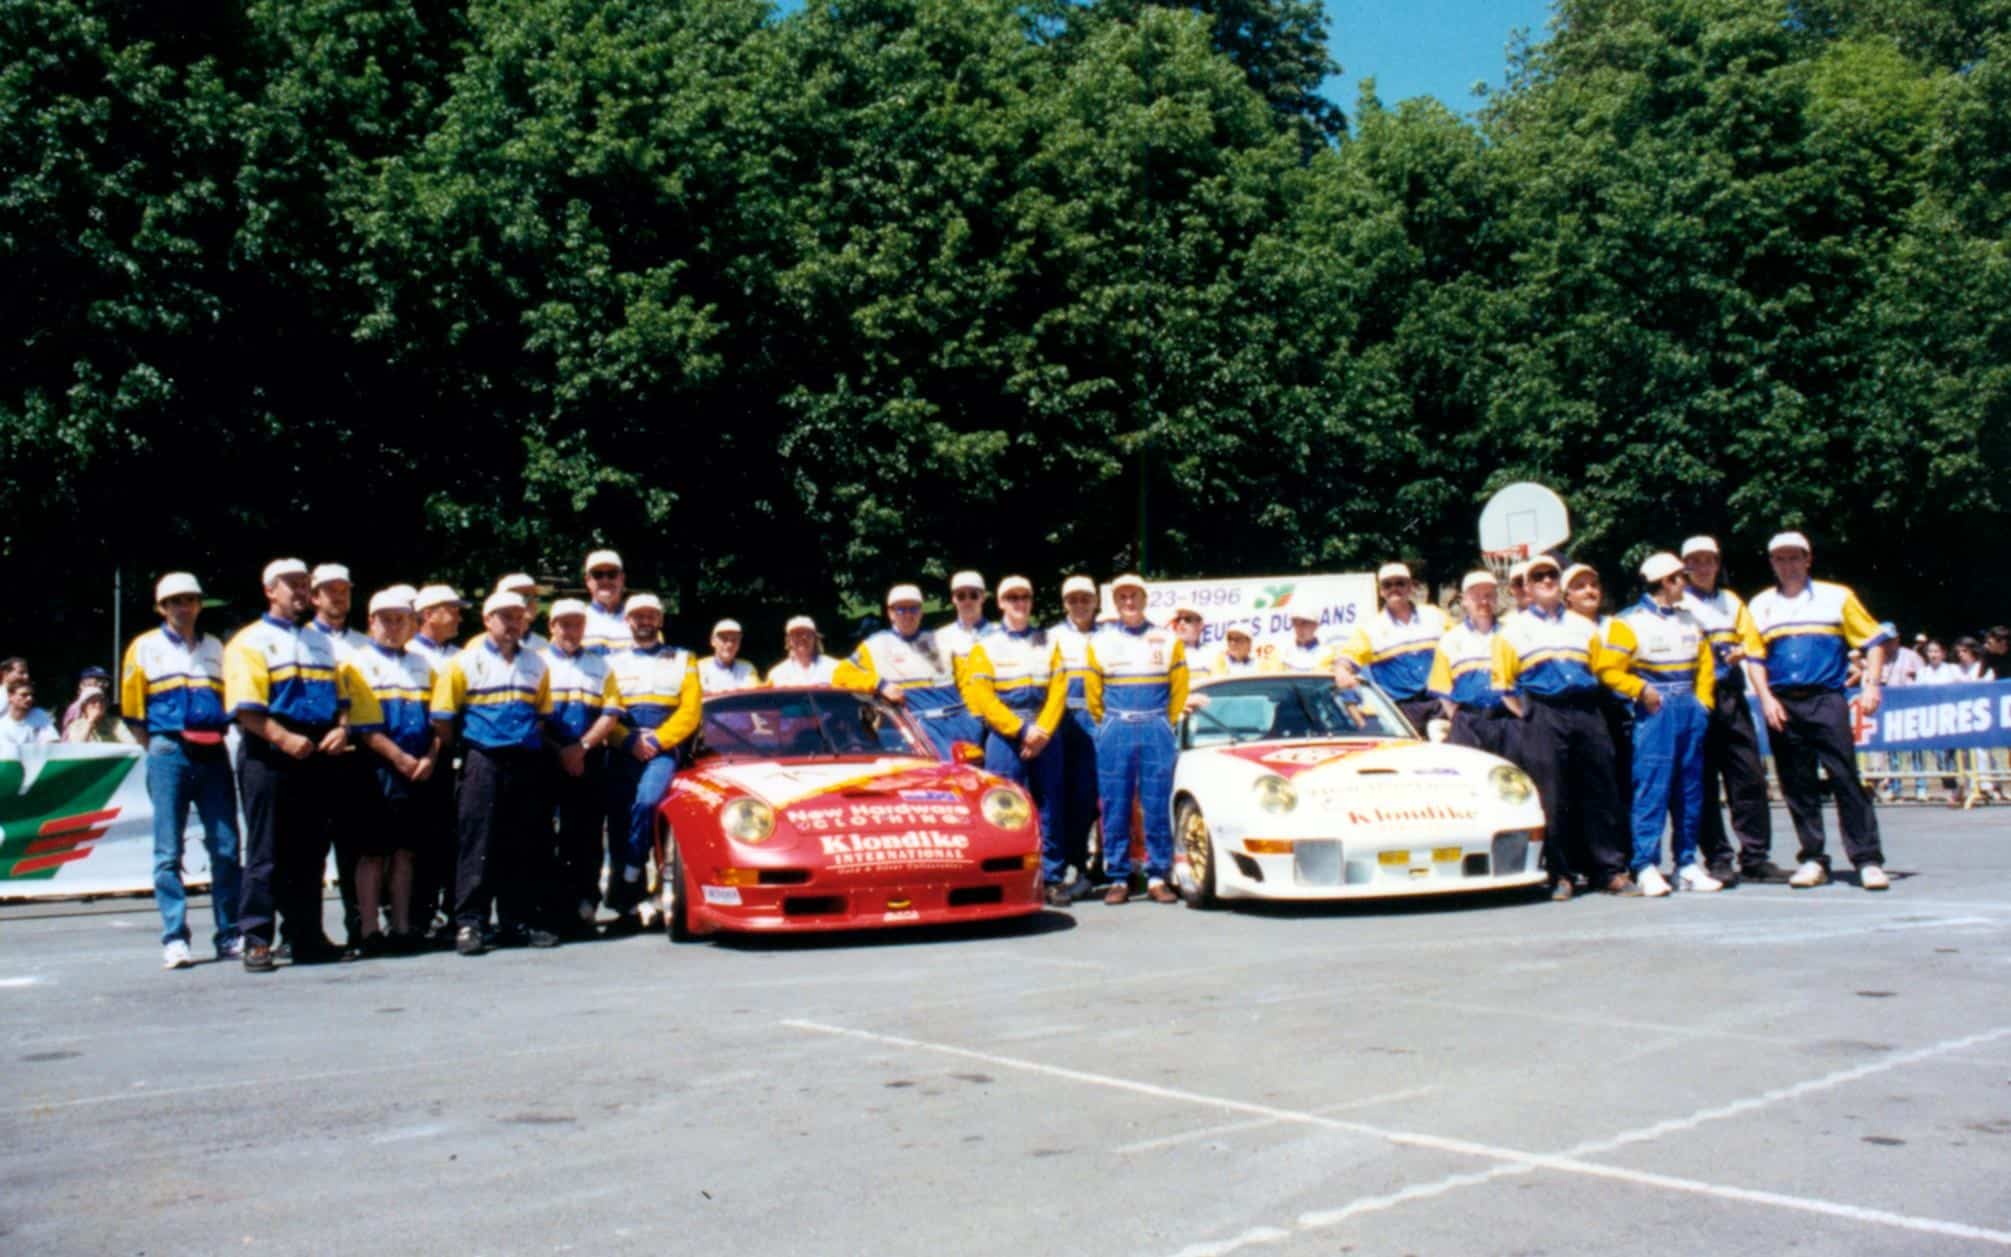 Le Mans 1996 – The ‘Le Kiwi Comeback’ Teams of Bill Farmer and Andrew Bagnall and their Porsche 911 GT2 LM cars - photo Andrew Ryan